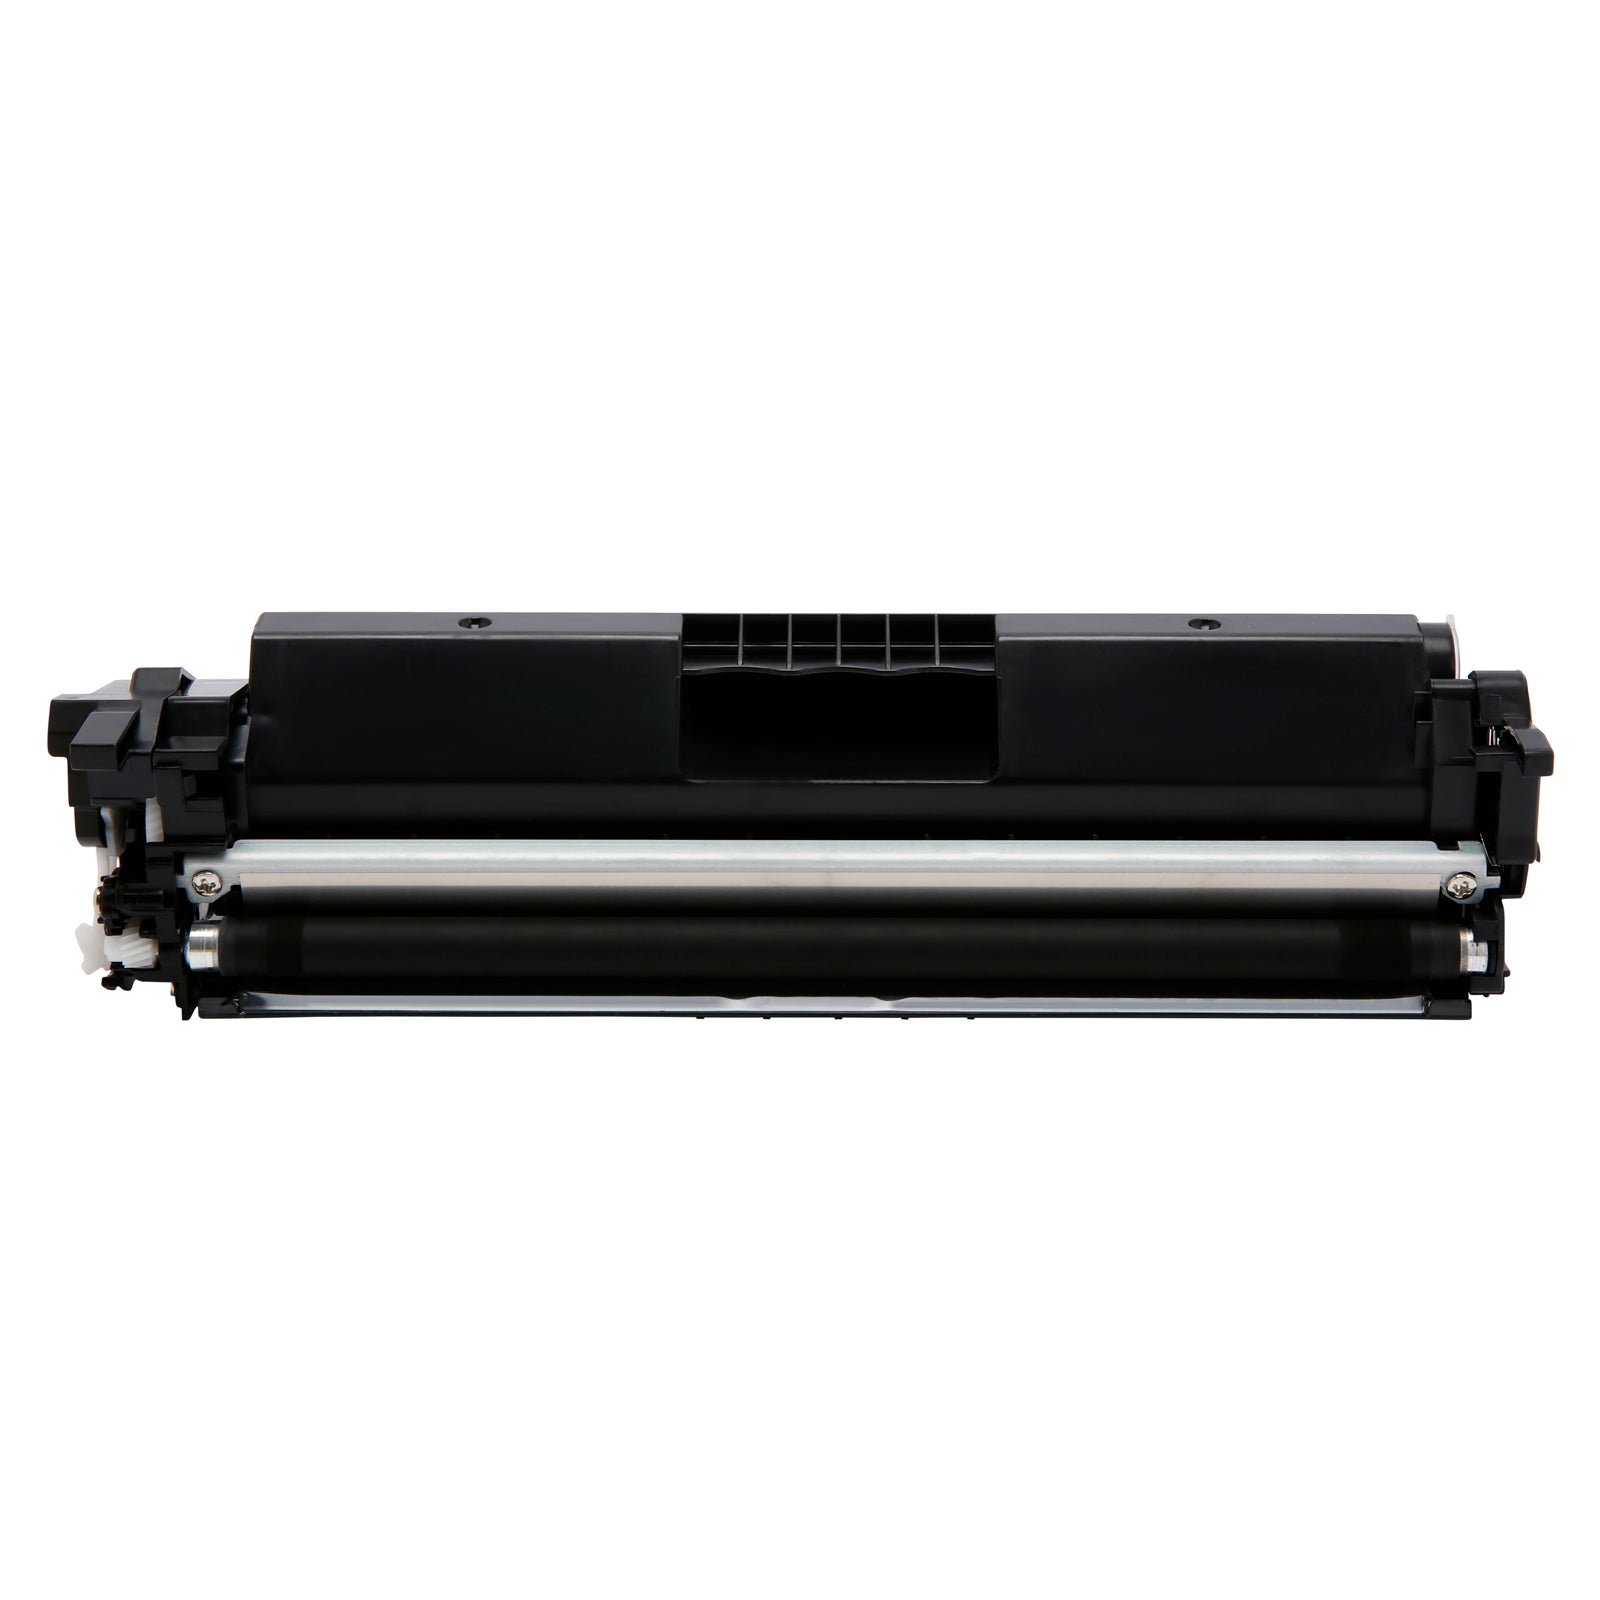 SKY 17A Toner Cartridge CF217A for HP Laserjet Pro M102 and M130 series Printers